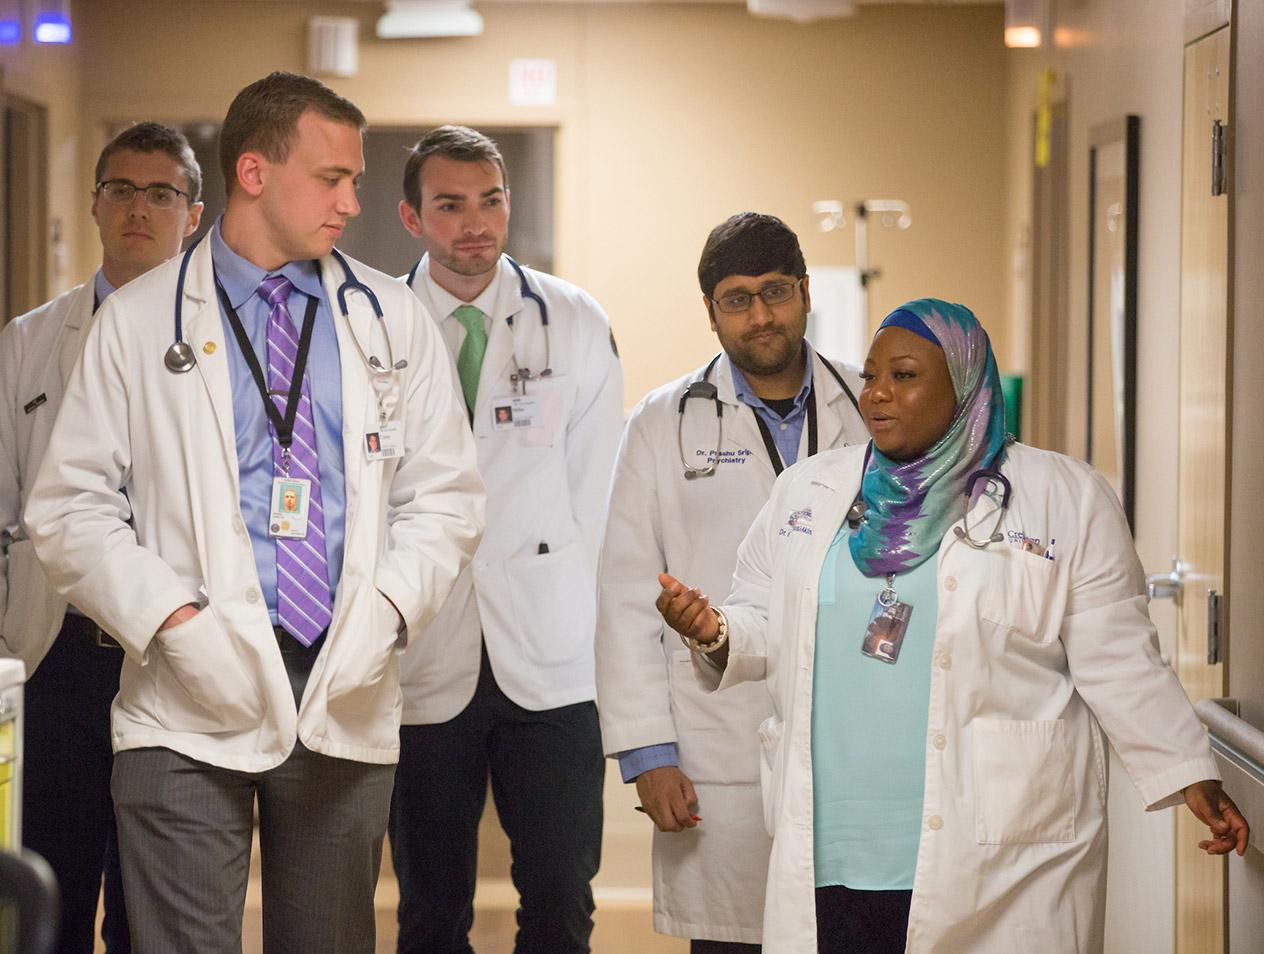 A group of medical students walking and talking with their supervising doctor